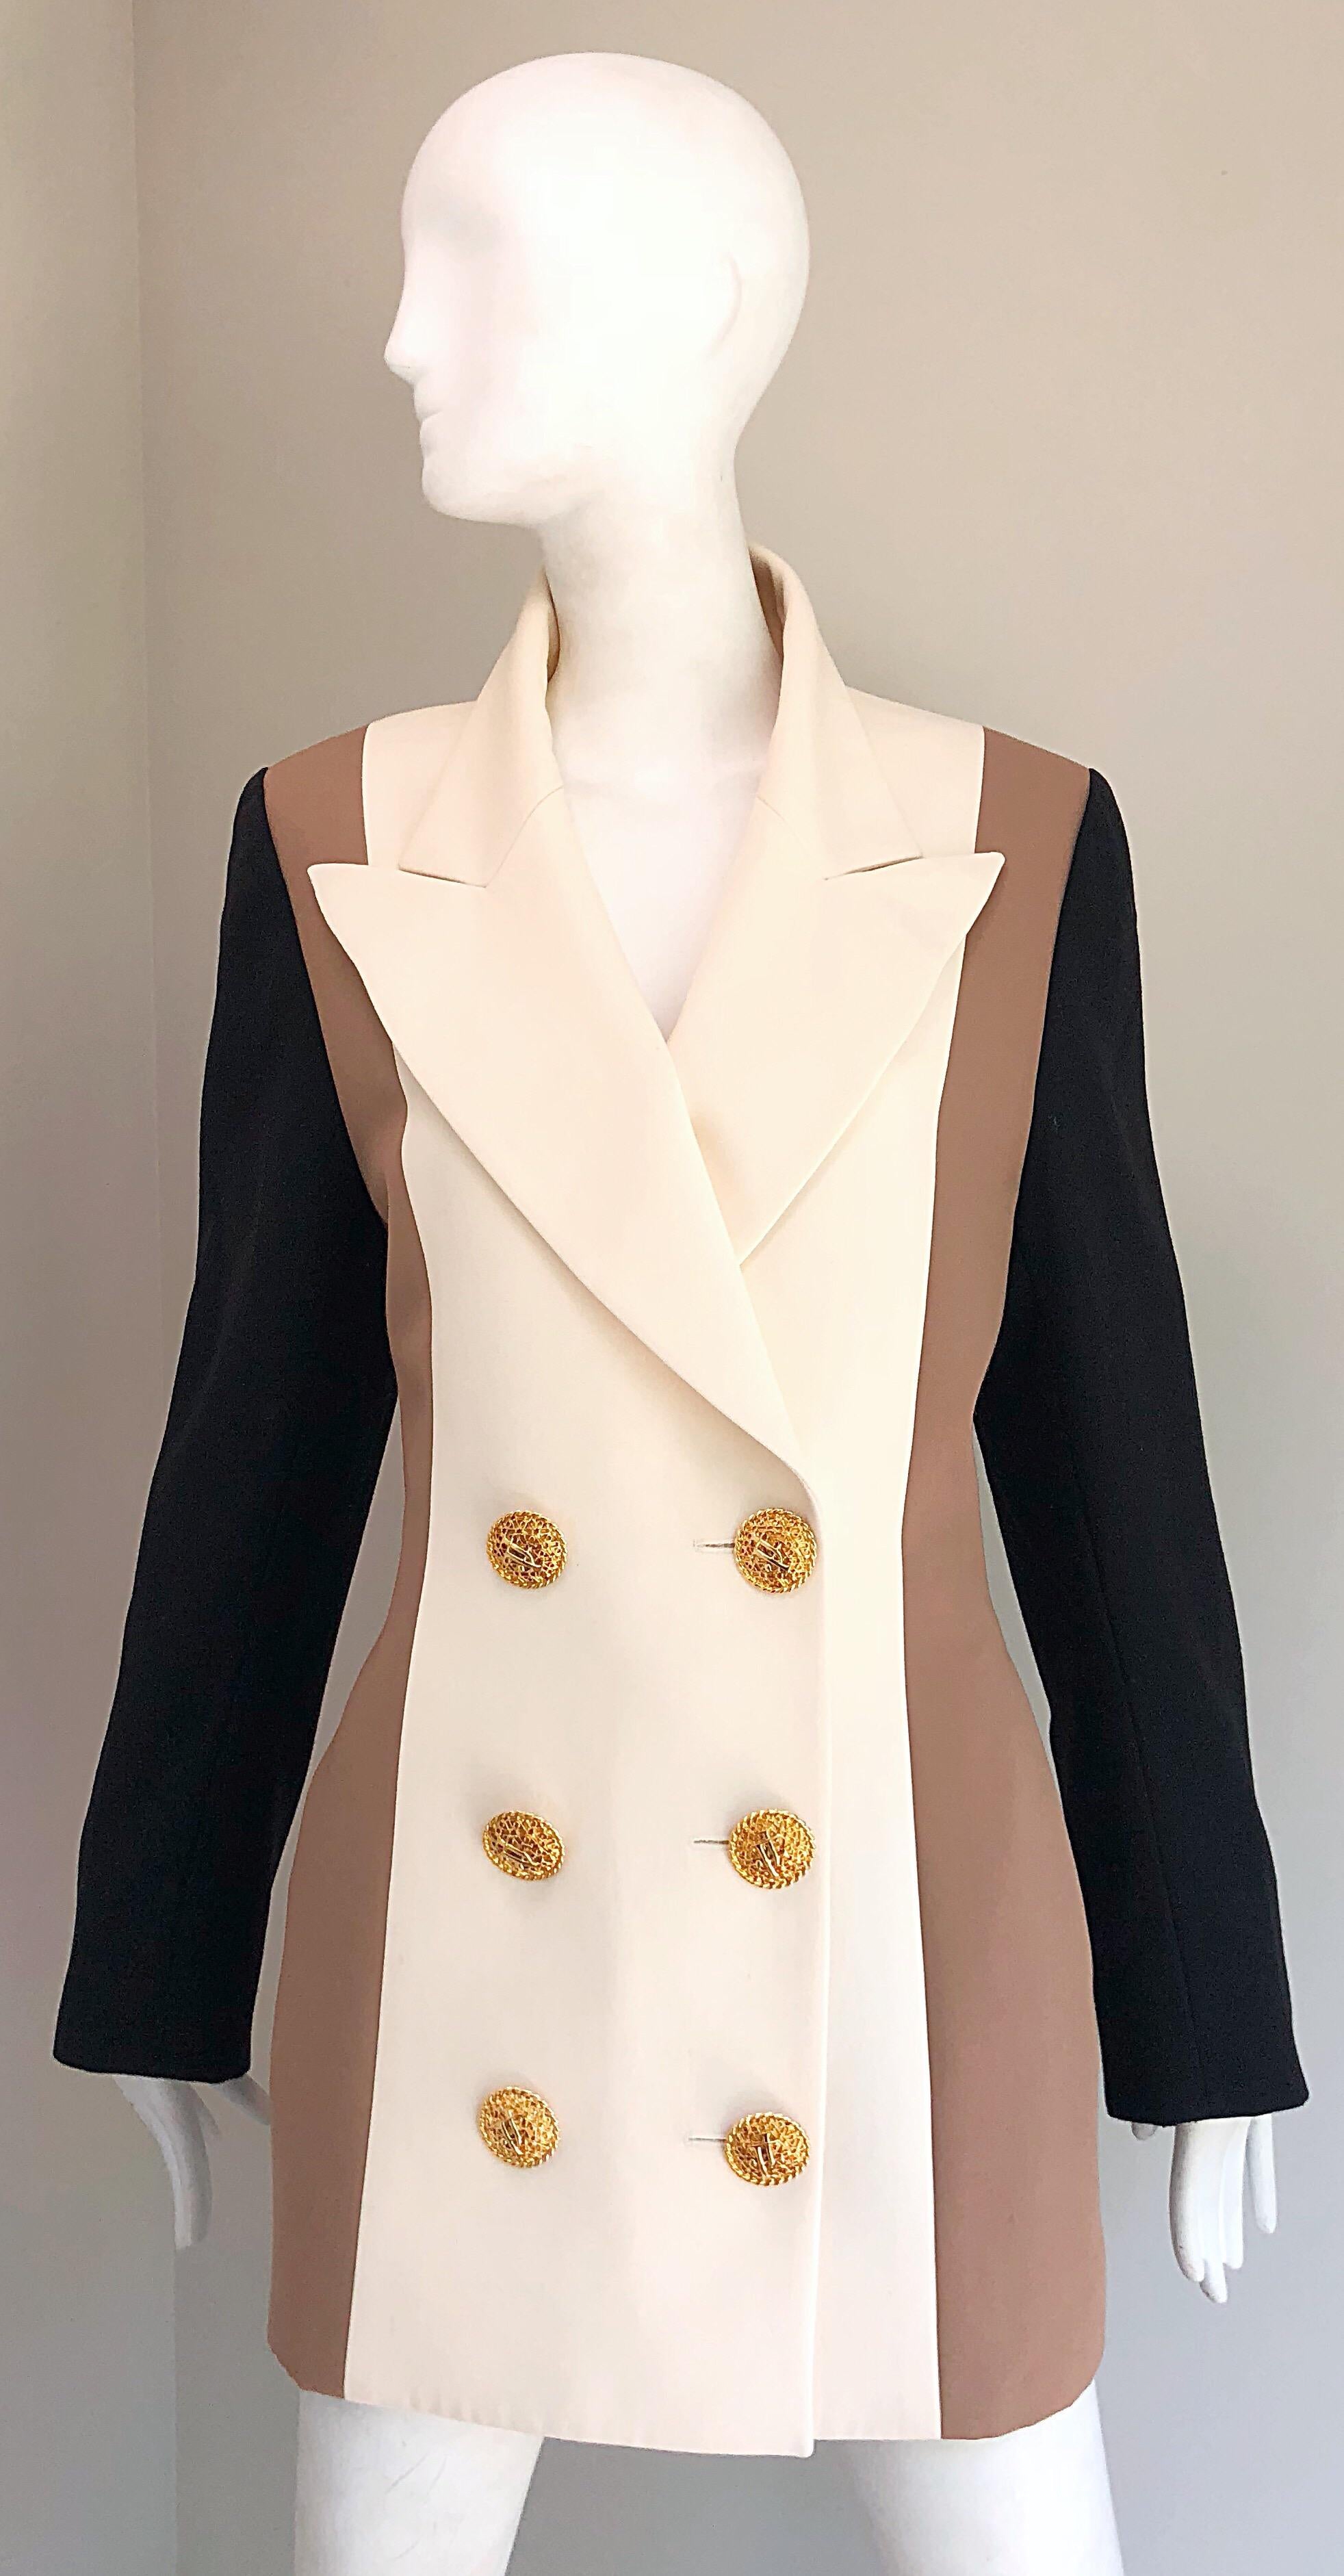 Chic vintage JACQUES FATH Couture ivory, taupe, and black double breasted color blocked blazer jacket! Features an ivory center, with taupe side panels, and black sleeves. With a matching back. Large gold 'JF' embossed buttons down the front and at